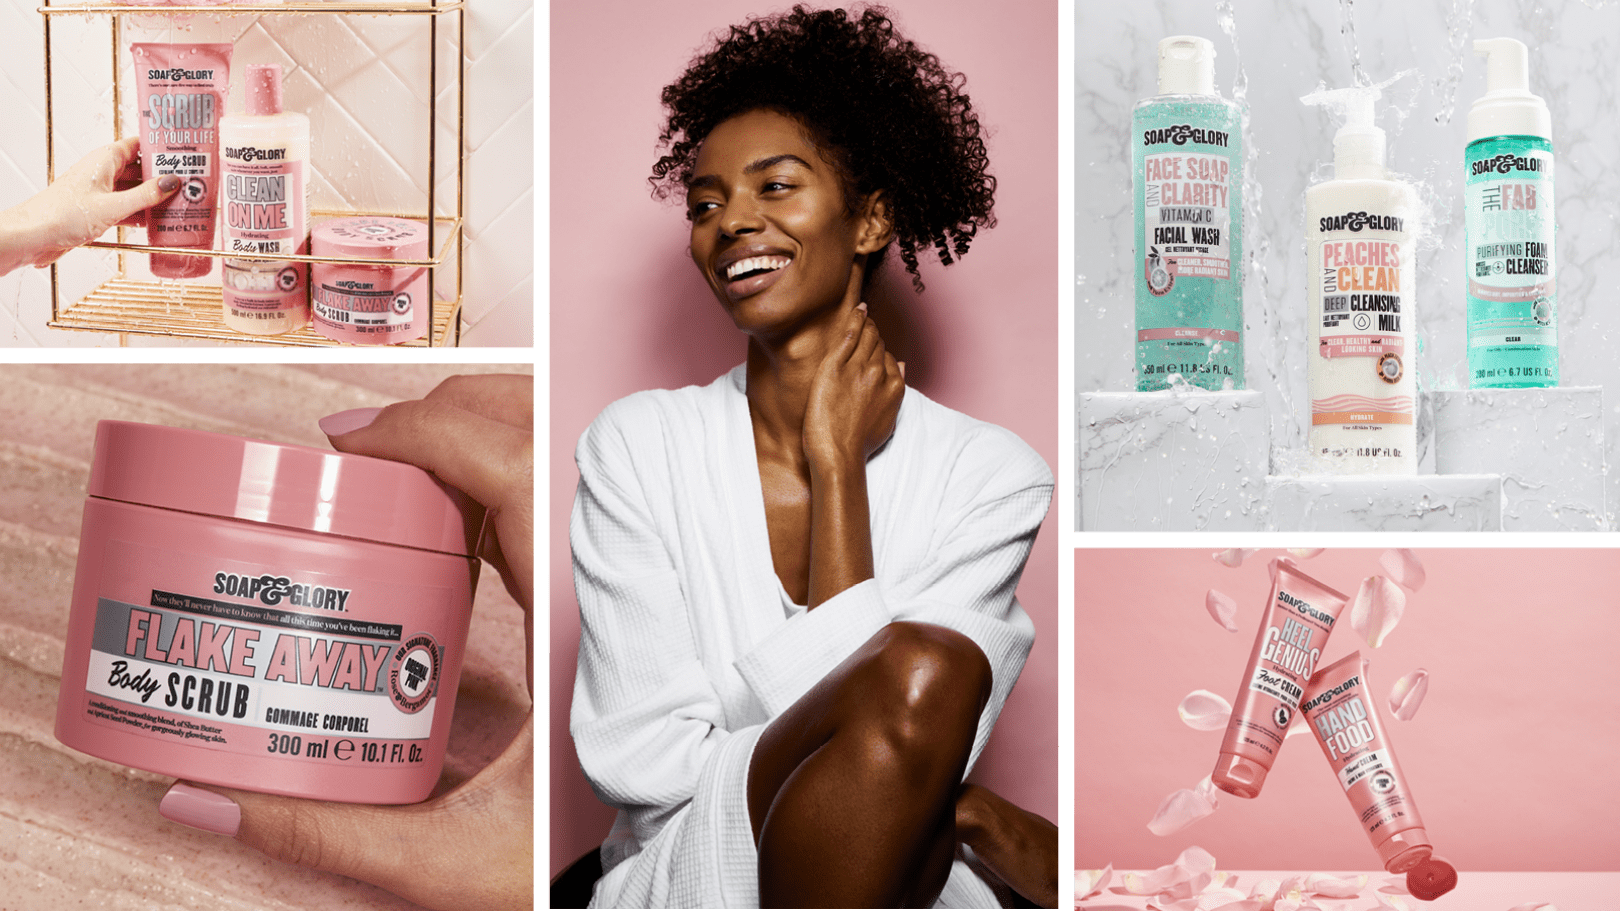 Grid image including Soap & Glory product and model shots